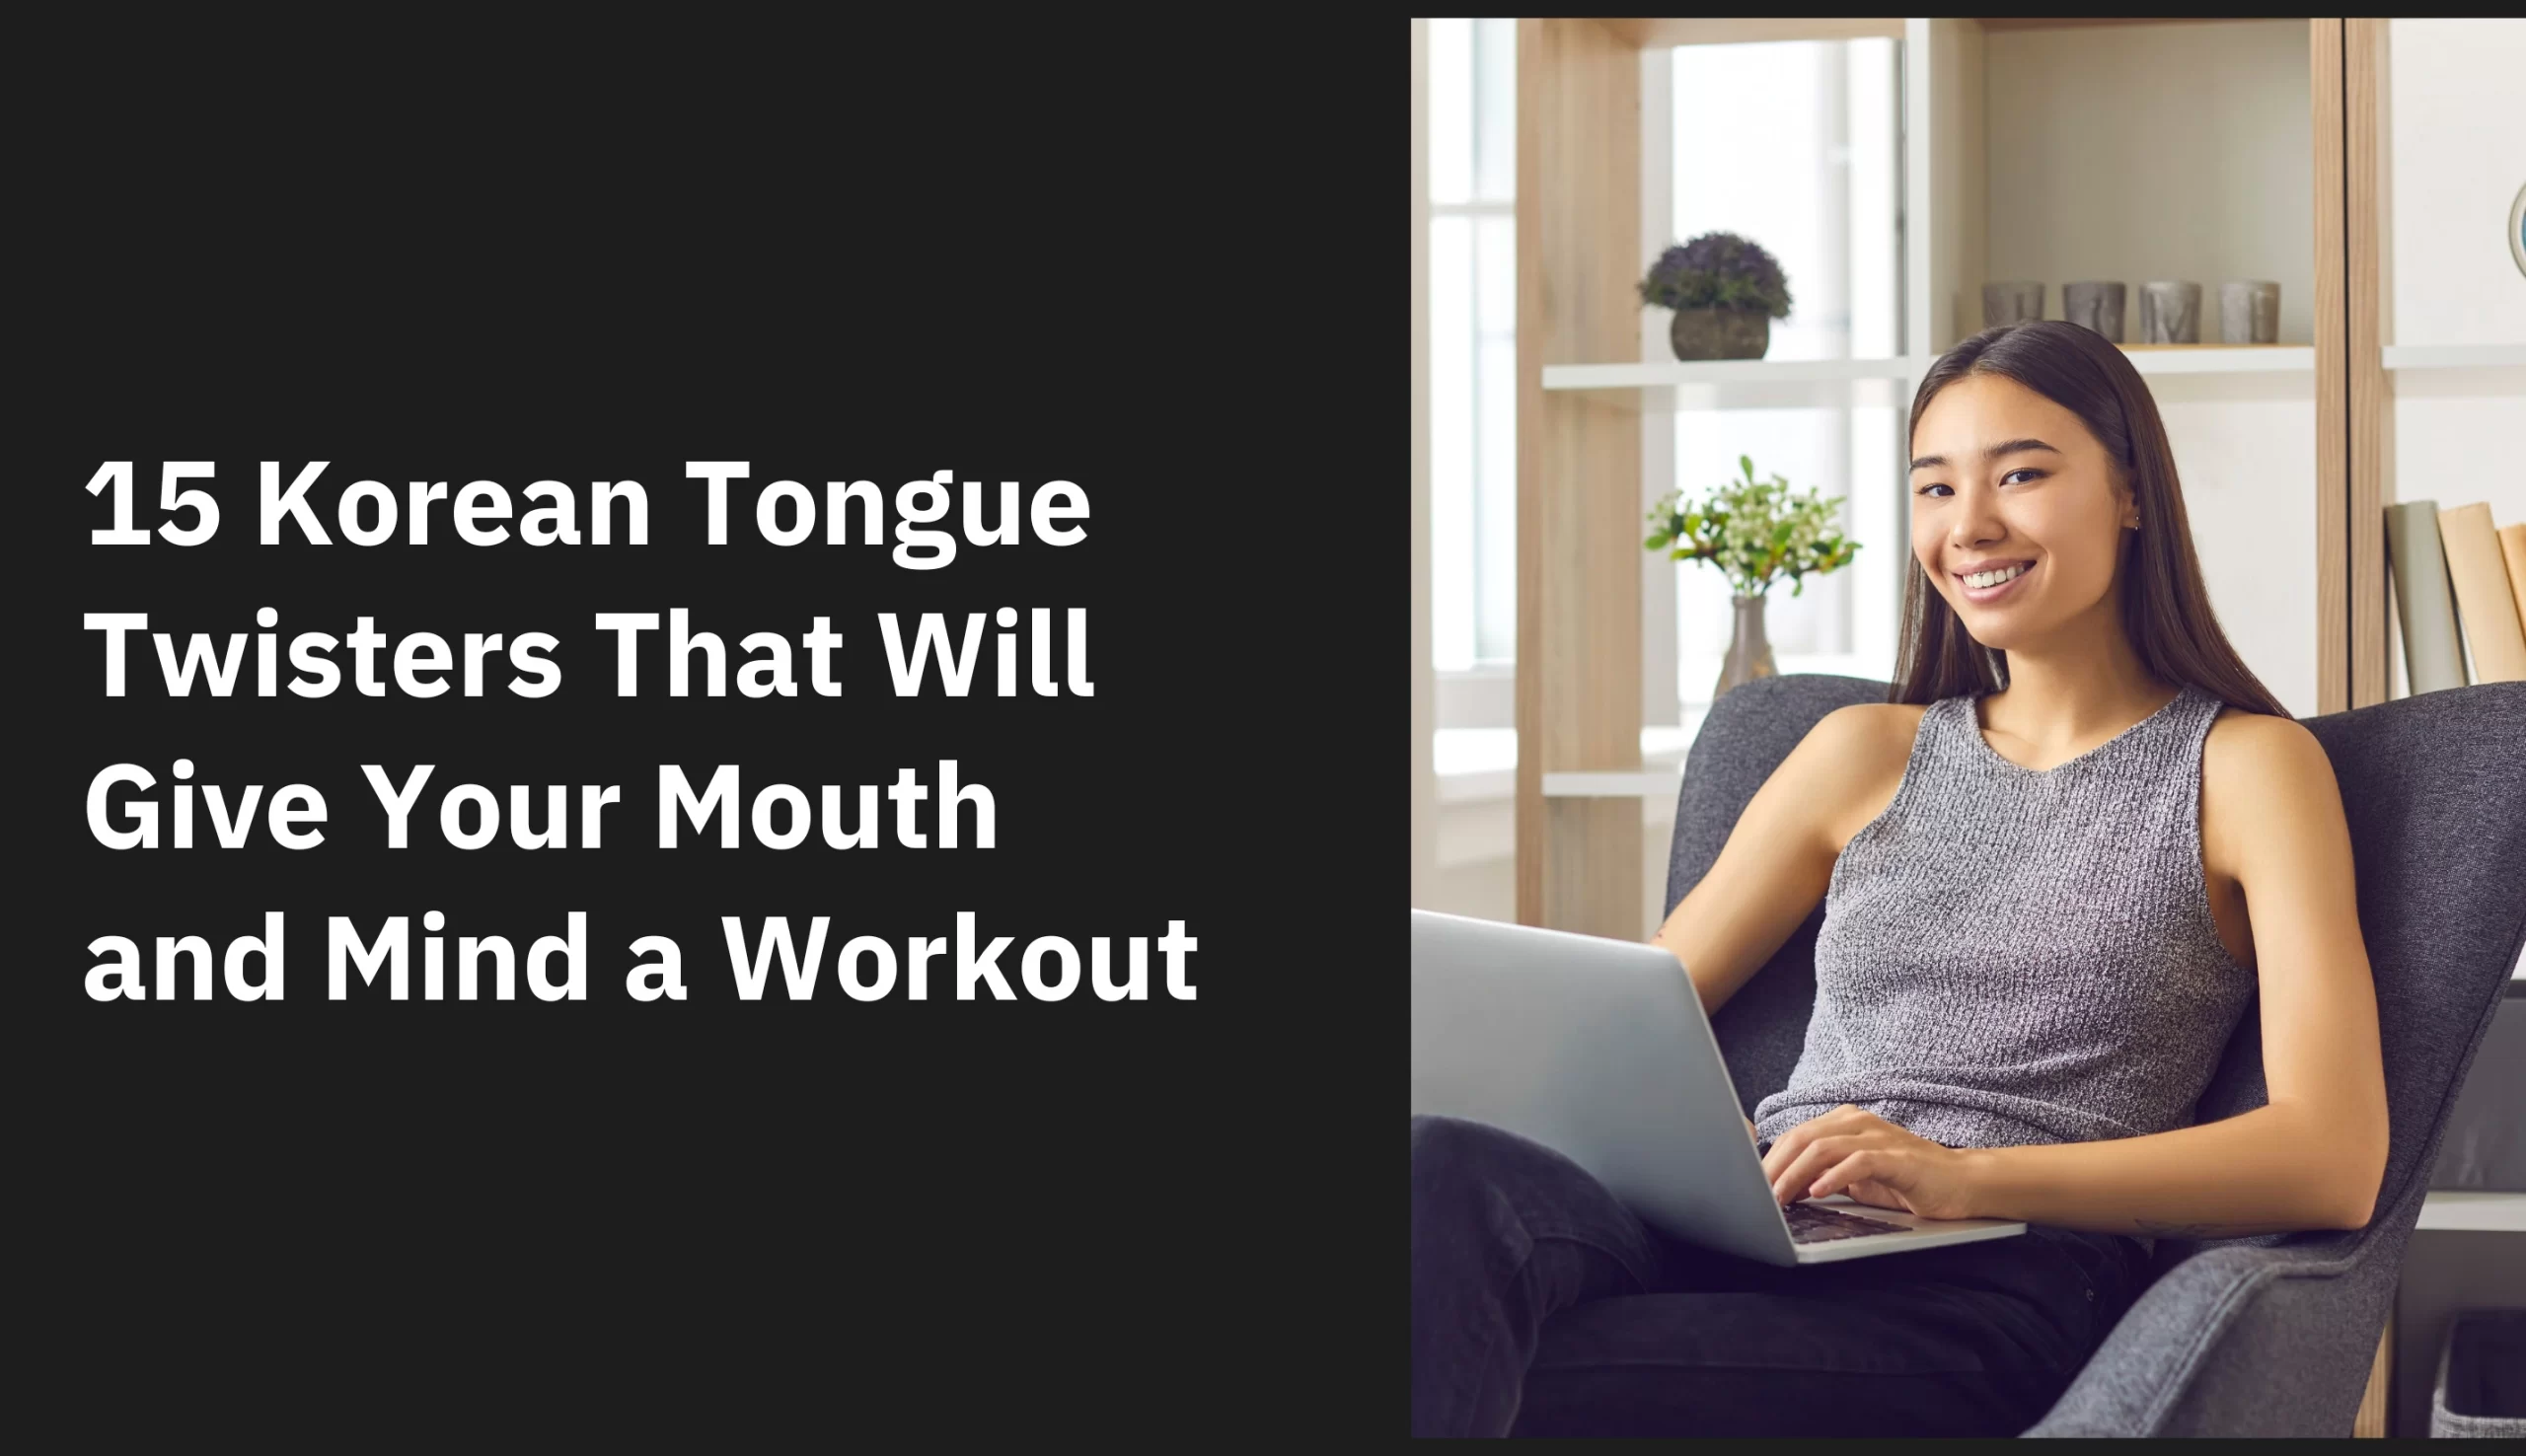 15 Korean Tongue Twisters That Will Give Your Mouth and Mind a Workout